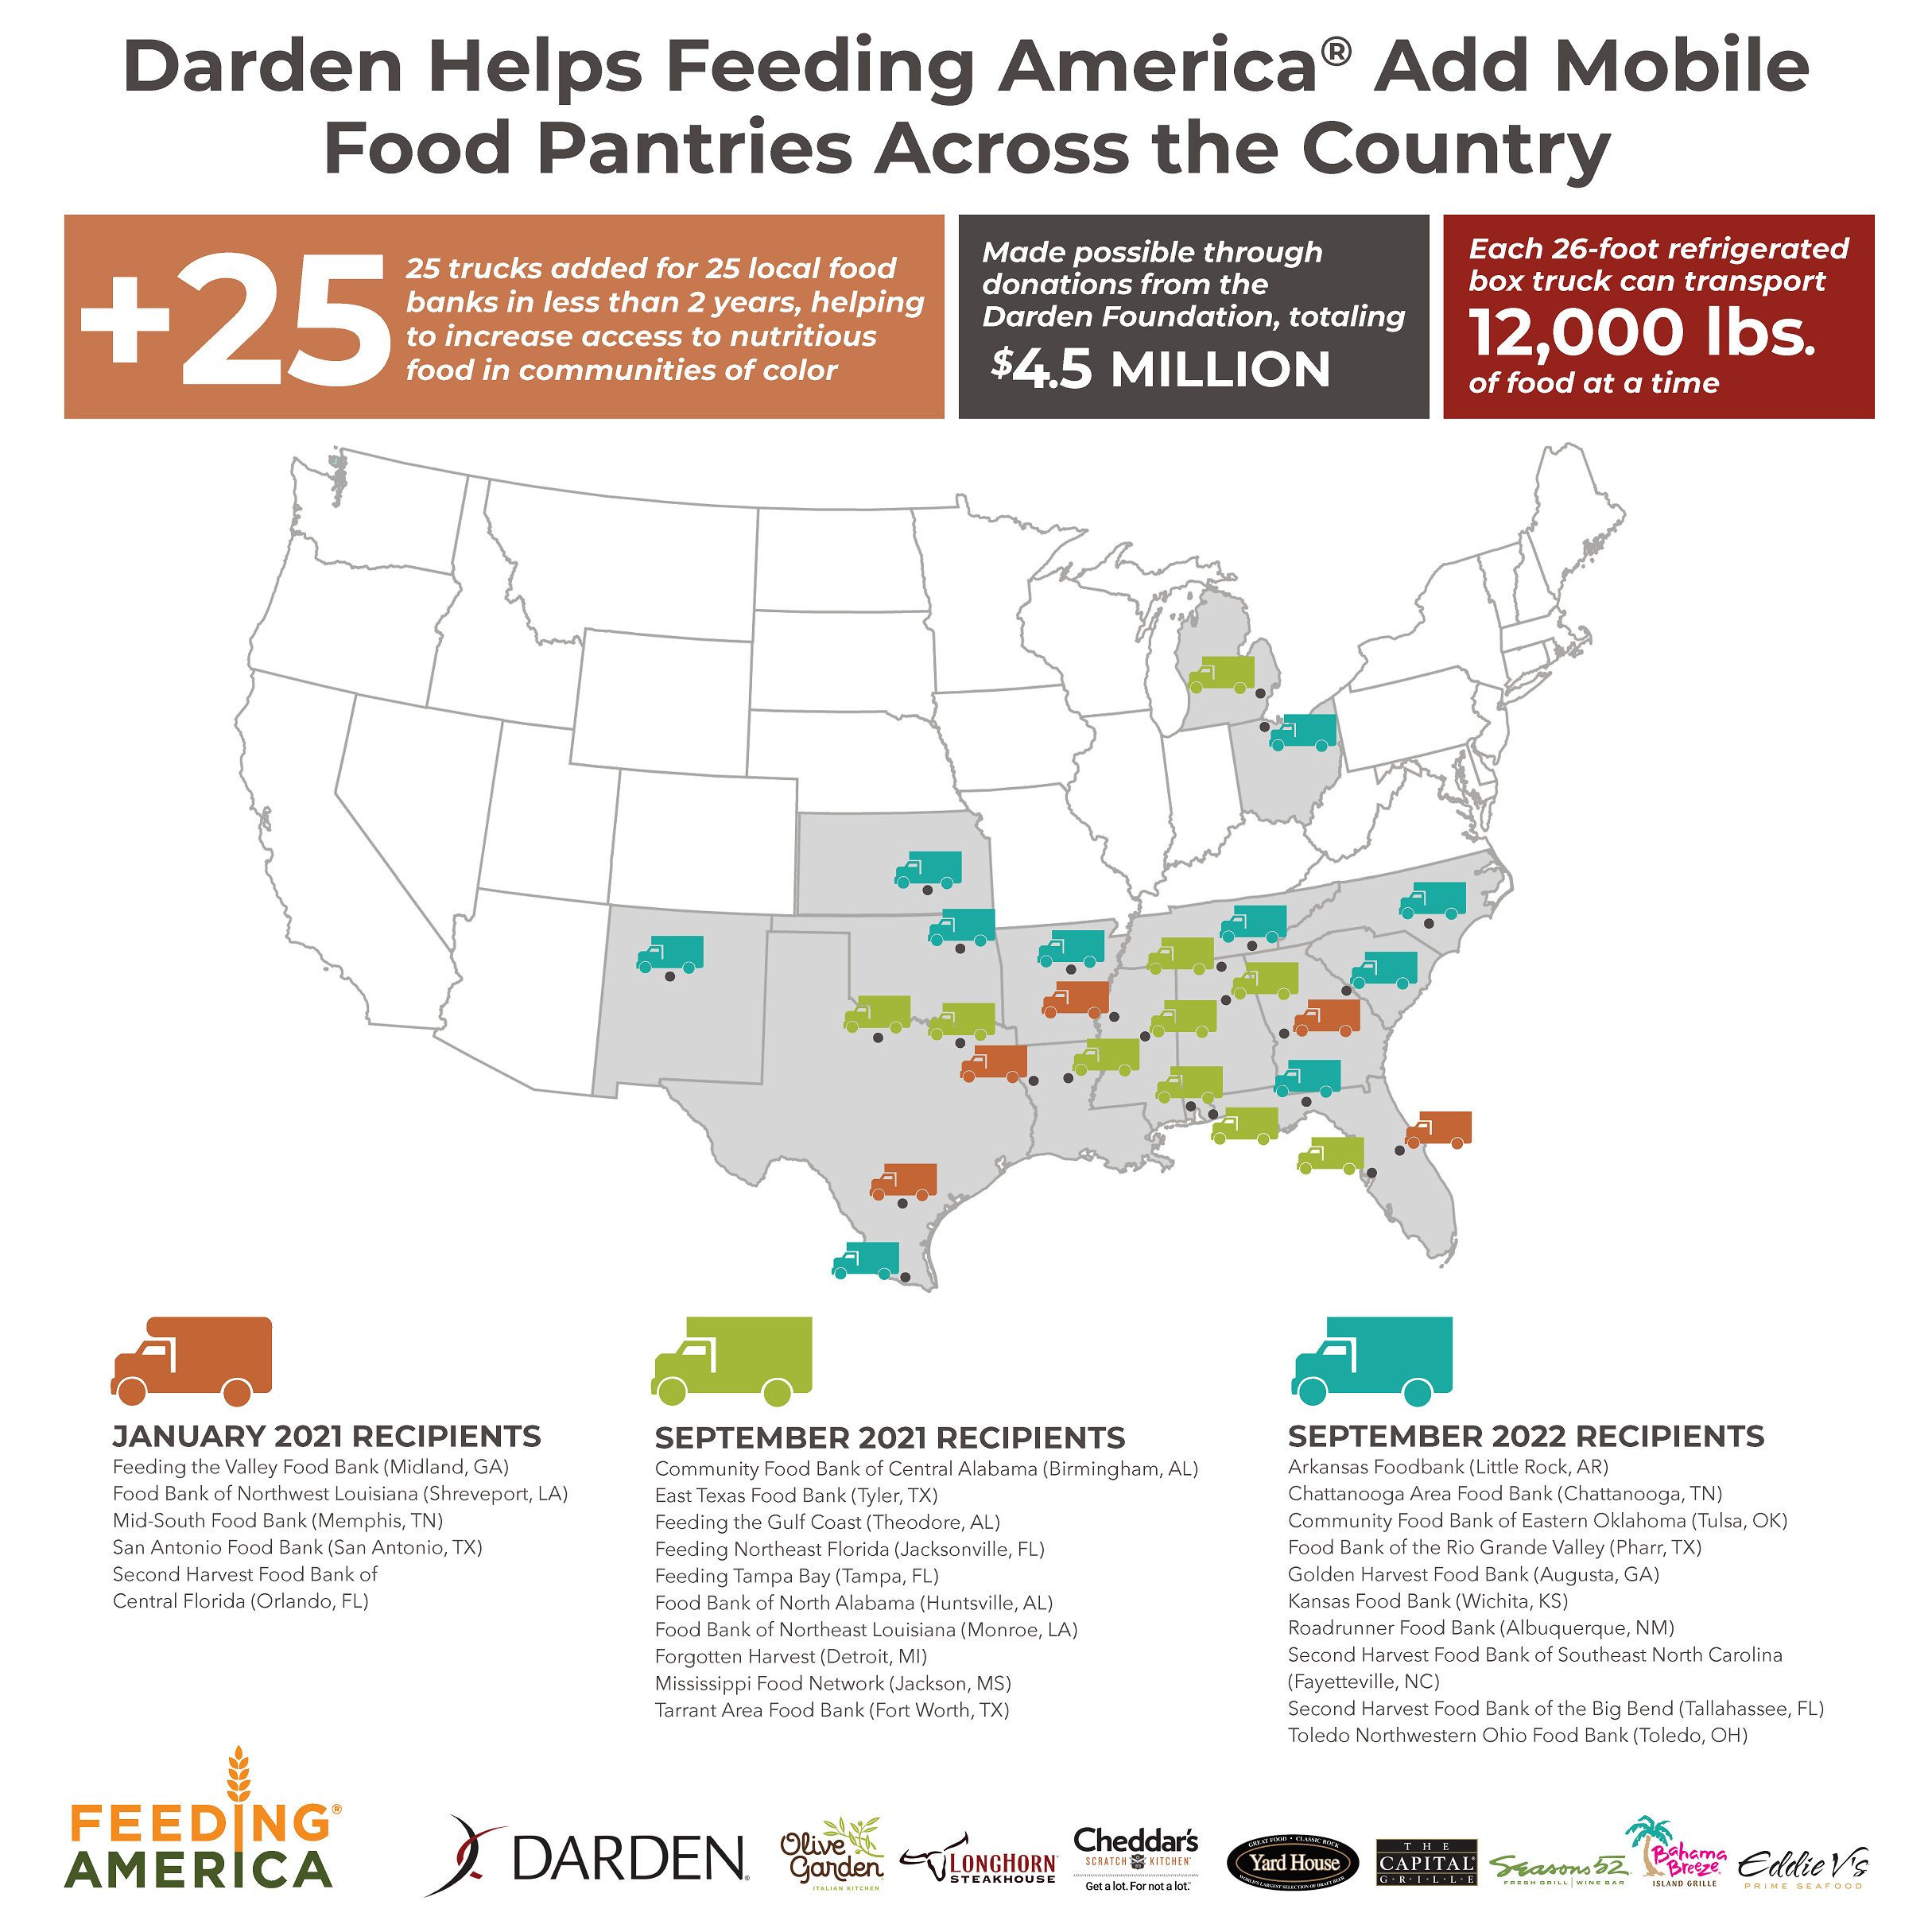 Darden Helps Feeding America® Add Mobile Food Pantries Across the Country